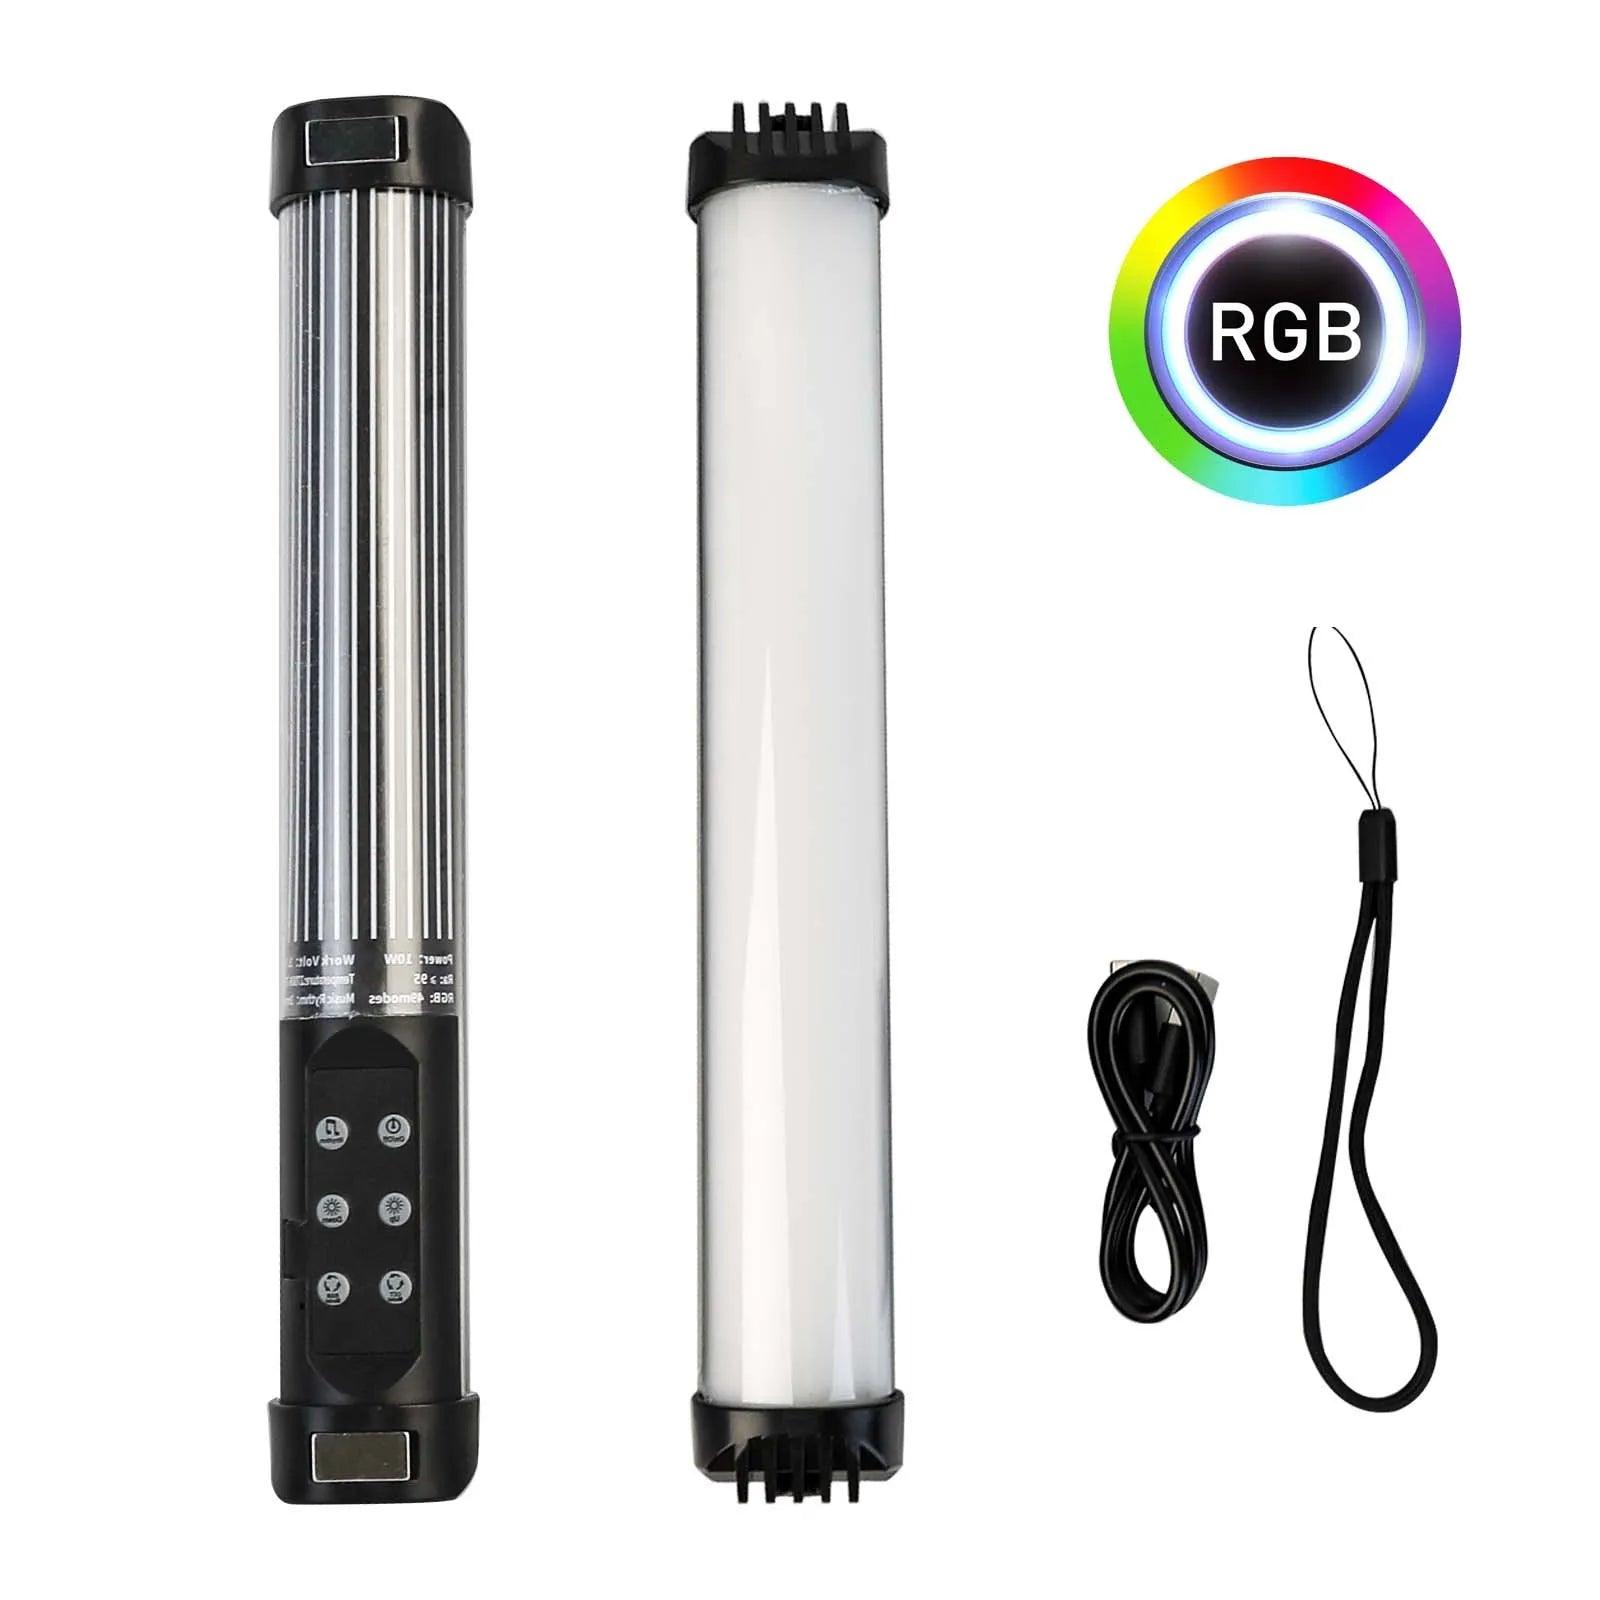 RGB Portable Handheld LED Fill Light Stick for Photography and Video Capture  ourlum.com   